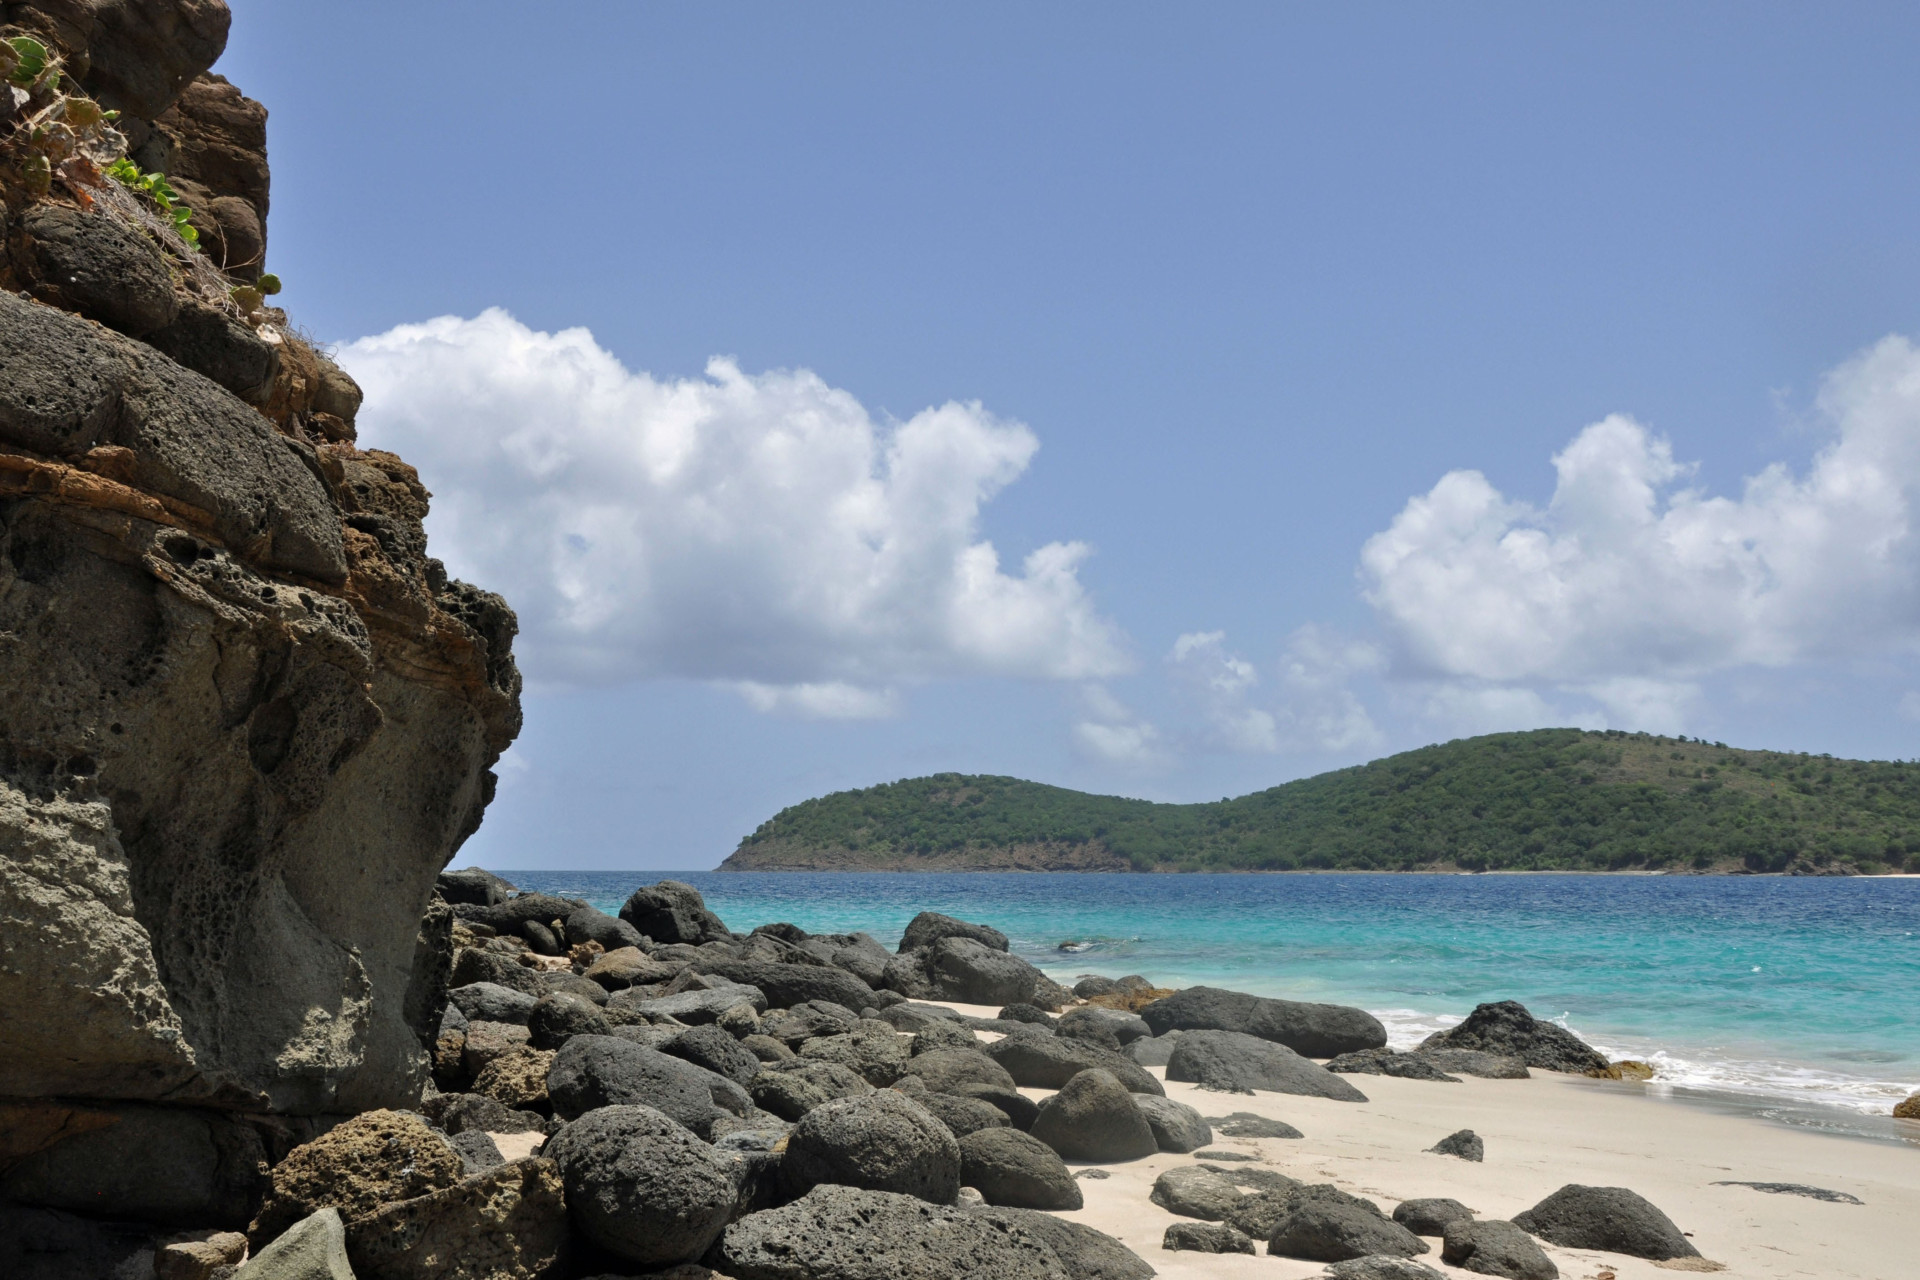 Located on Culebra Island, this beach is more desolate than its sister, Flamenco Beach. If you’re after some peace and quiet, this is the place to go.<p>You may also like:<a href="https://www.starsinsider.com/n/485821?utm_source=msn.com&utm_medium=display&utm_campaign=referral_description&utm_content=173131en-us"> Extinct human species: how different were they from us?</a></p>